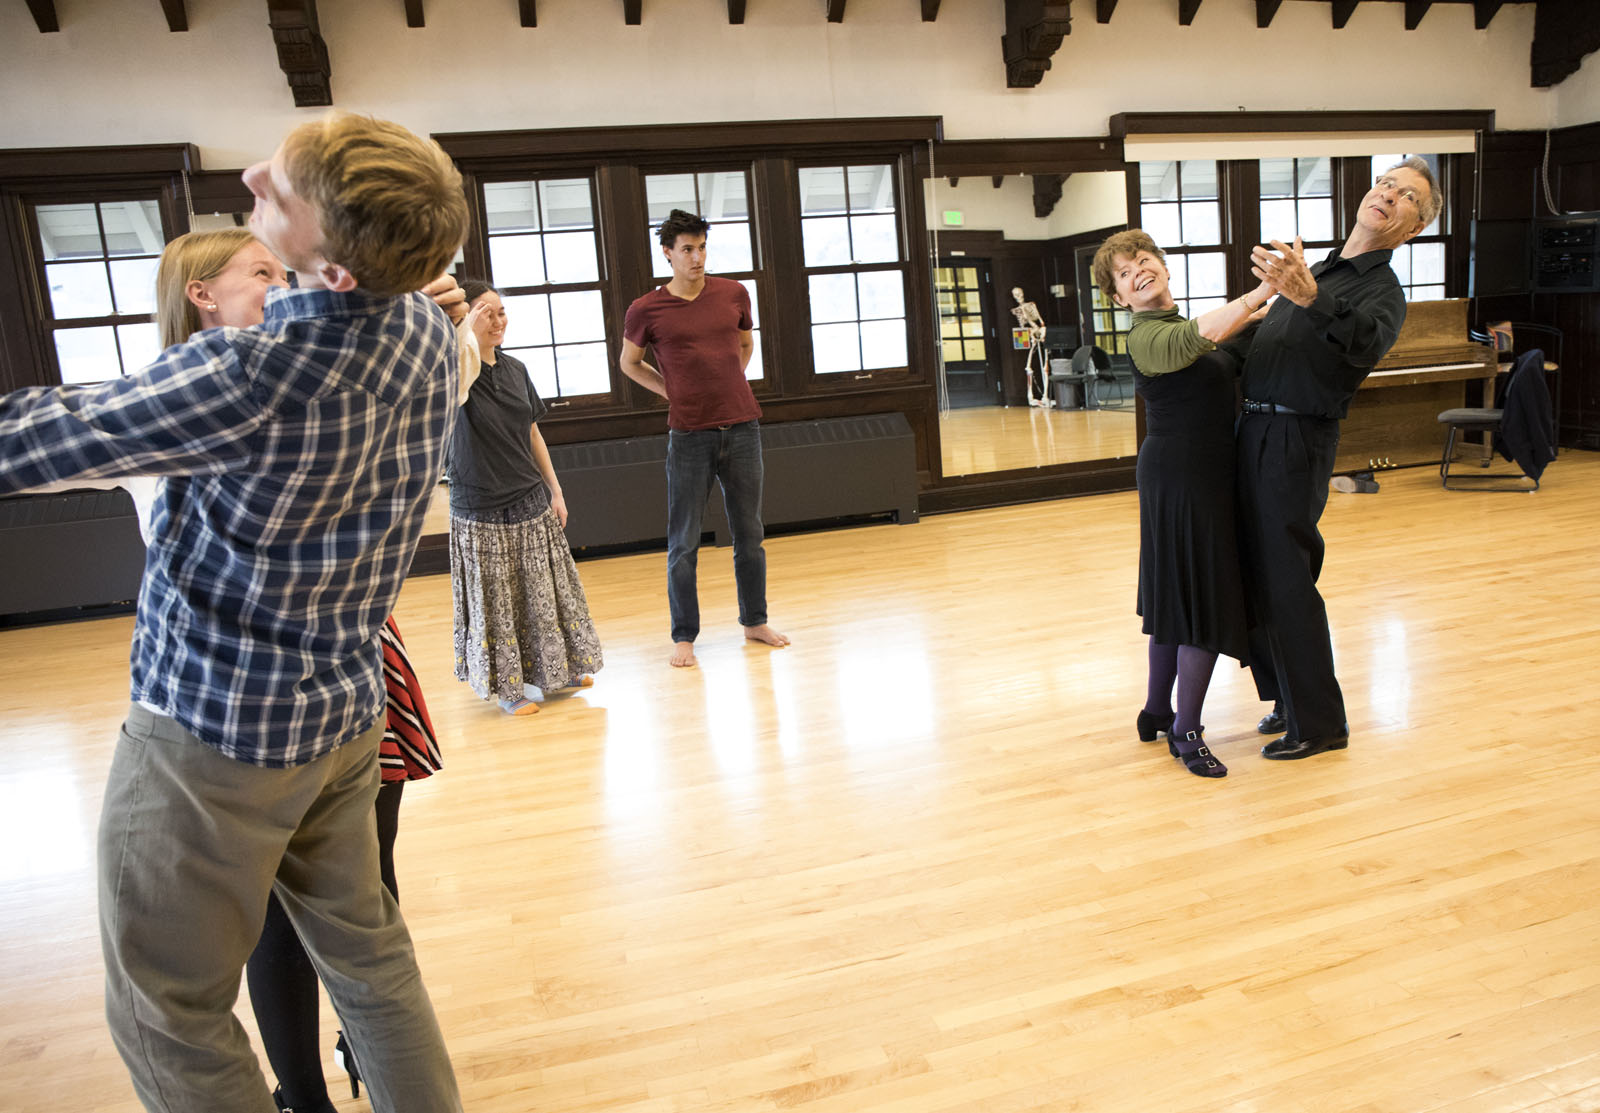 Marcia Dobson and John Riker teach a ballroom dancing class in Cossitt Hall that is open to students and staff alike. The class focuses on dance techniques for various dance styles.